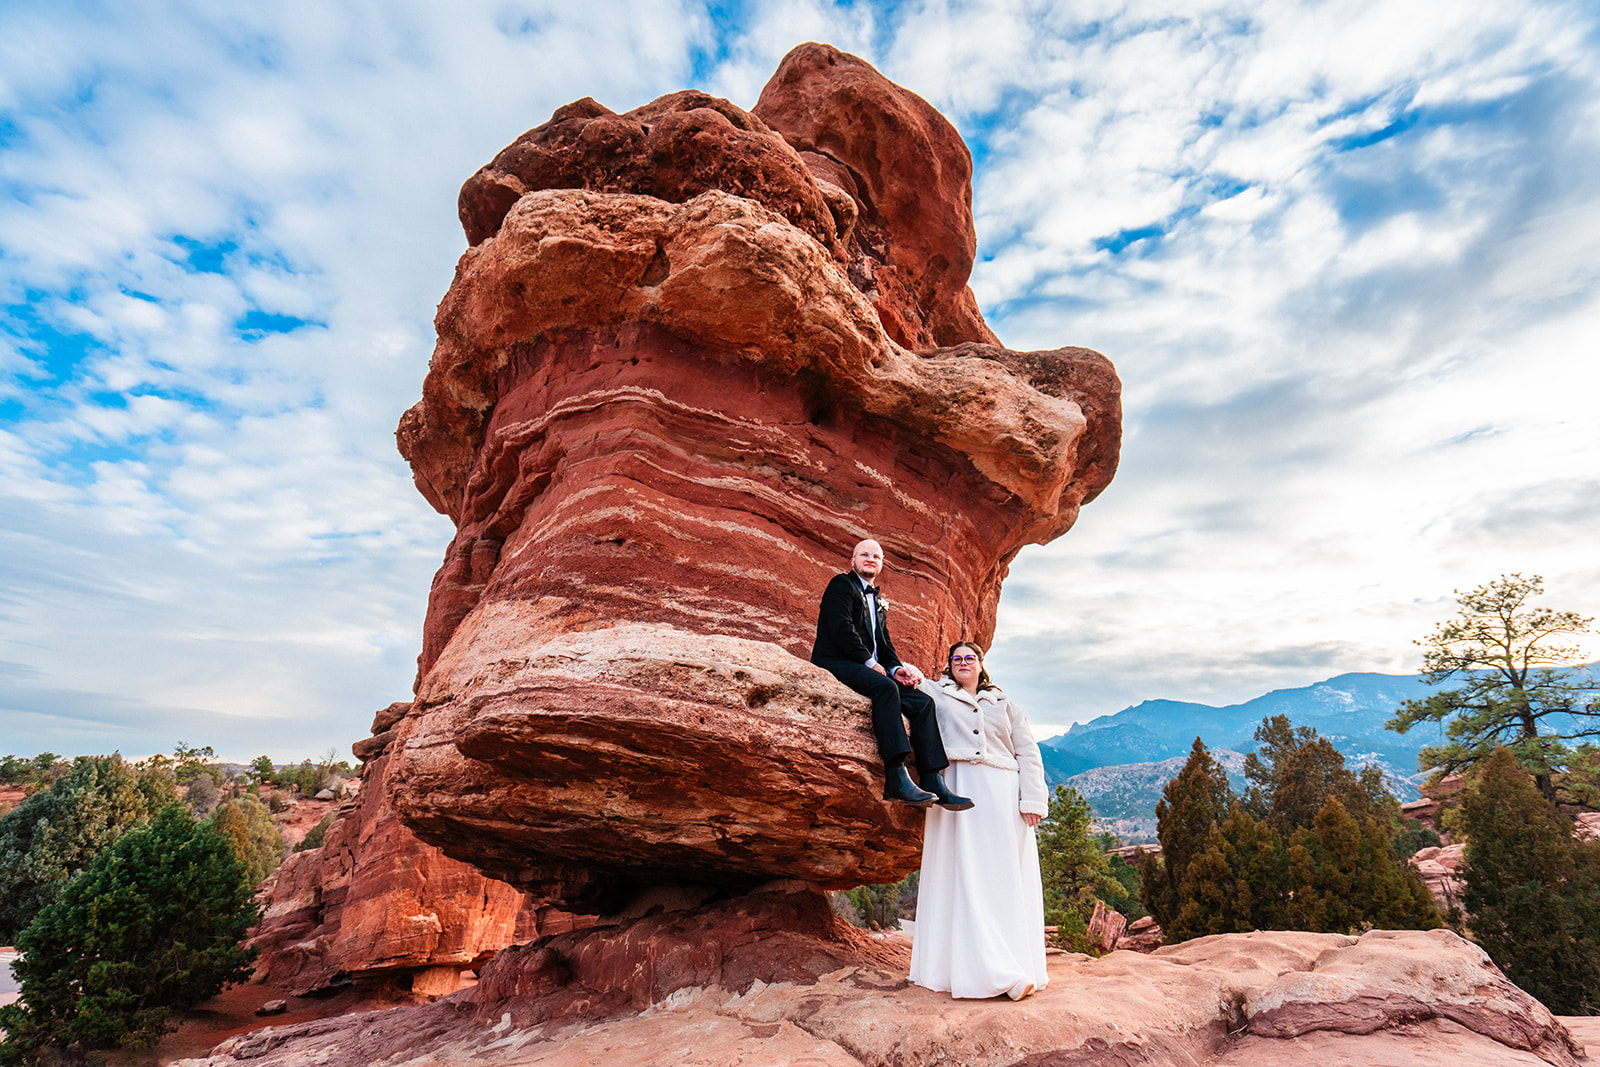 Dapper newlyweds hang out on the breathtaking Balanced Rock at Garden of the Gods during their elopement under a blue sky with clouds.